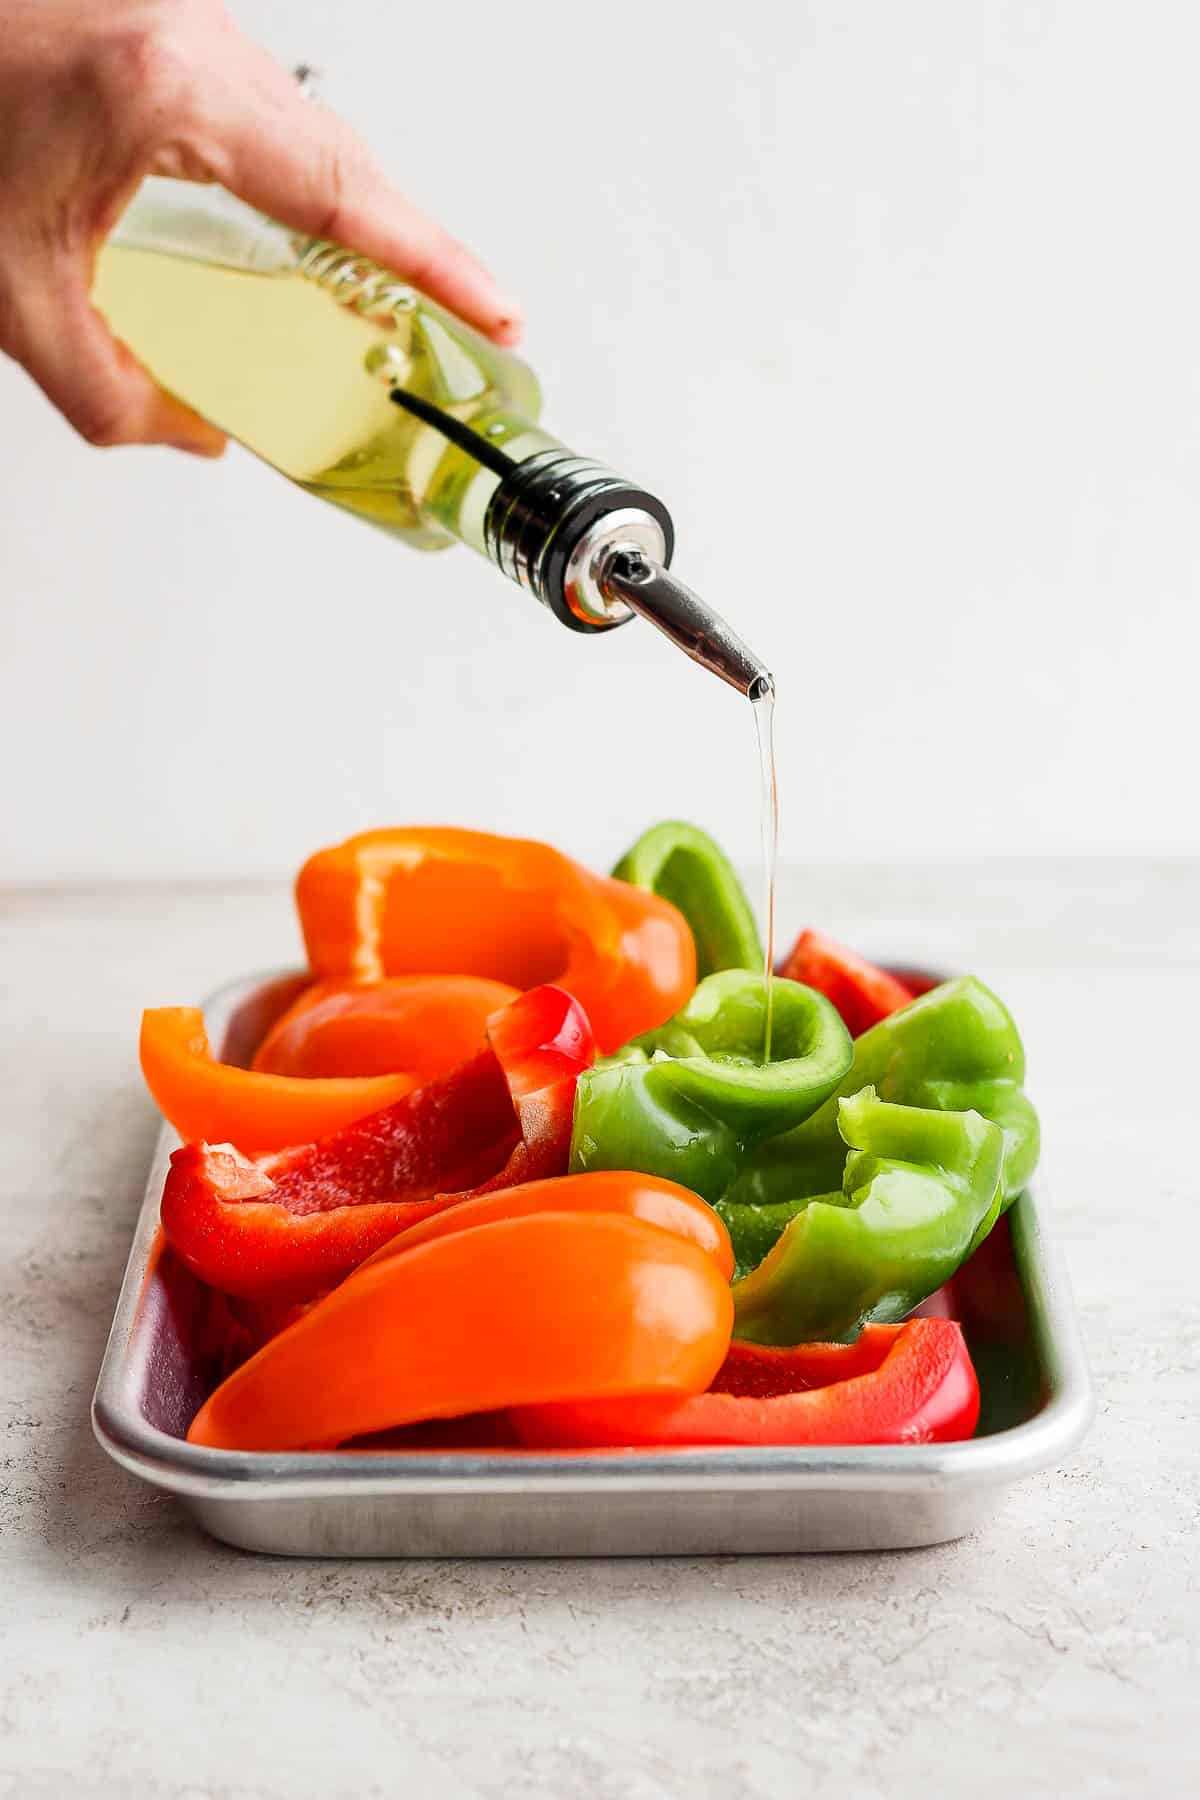 Olive oil being poured over quartered pieces of bell pepper.